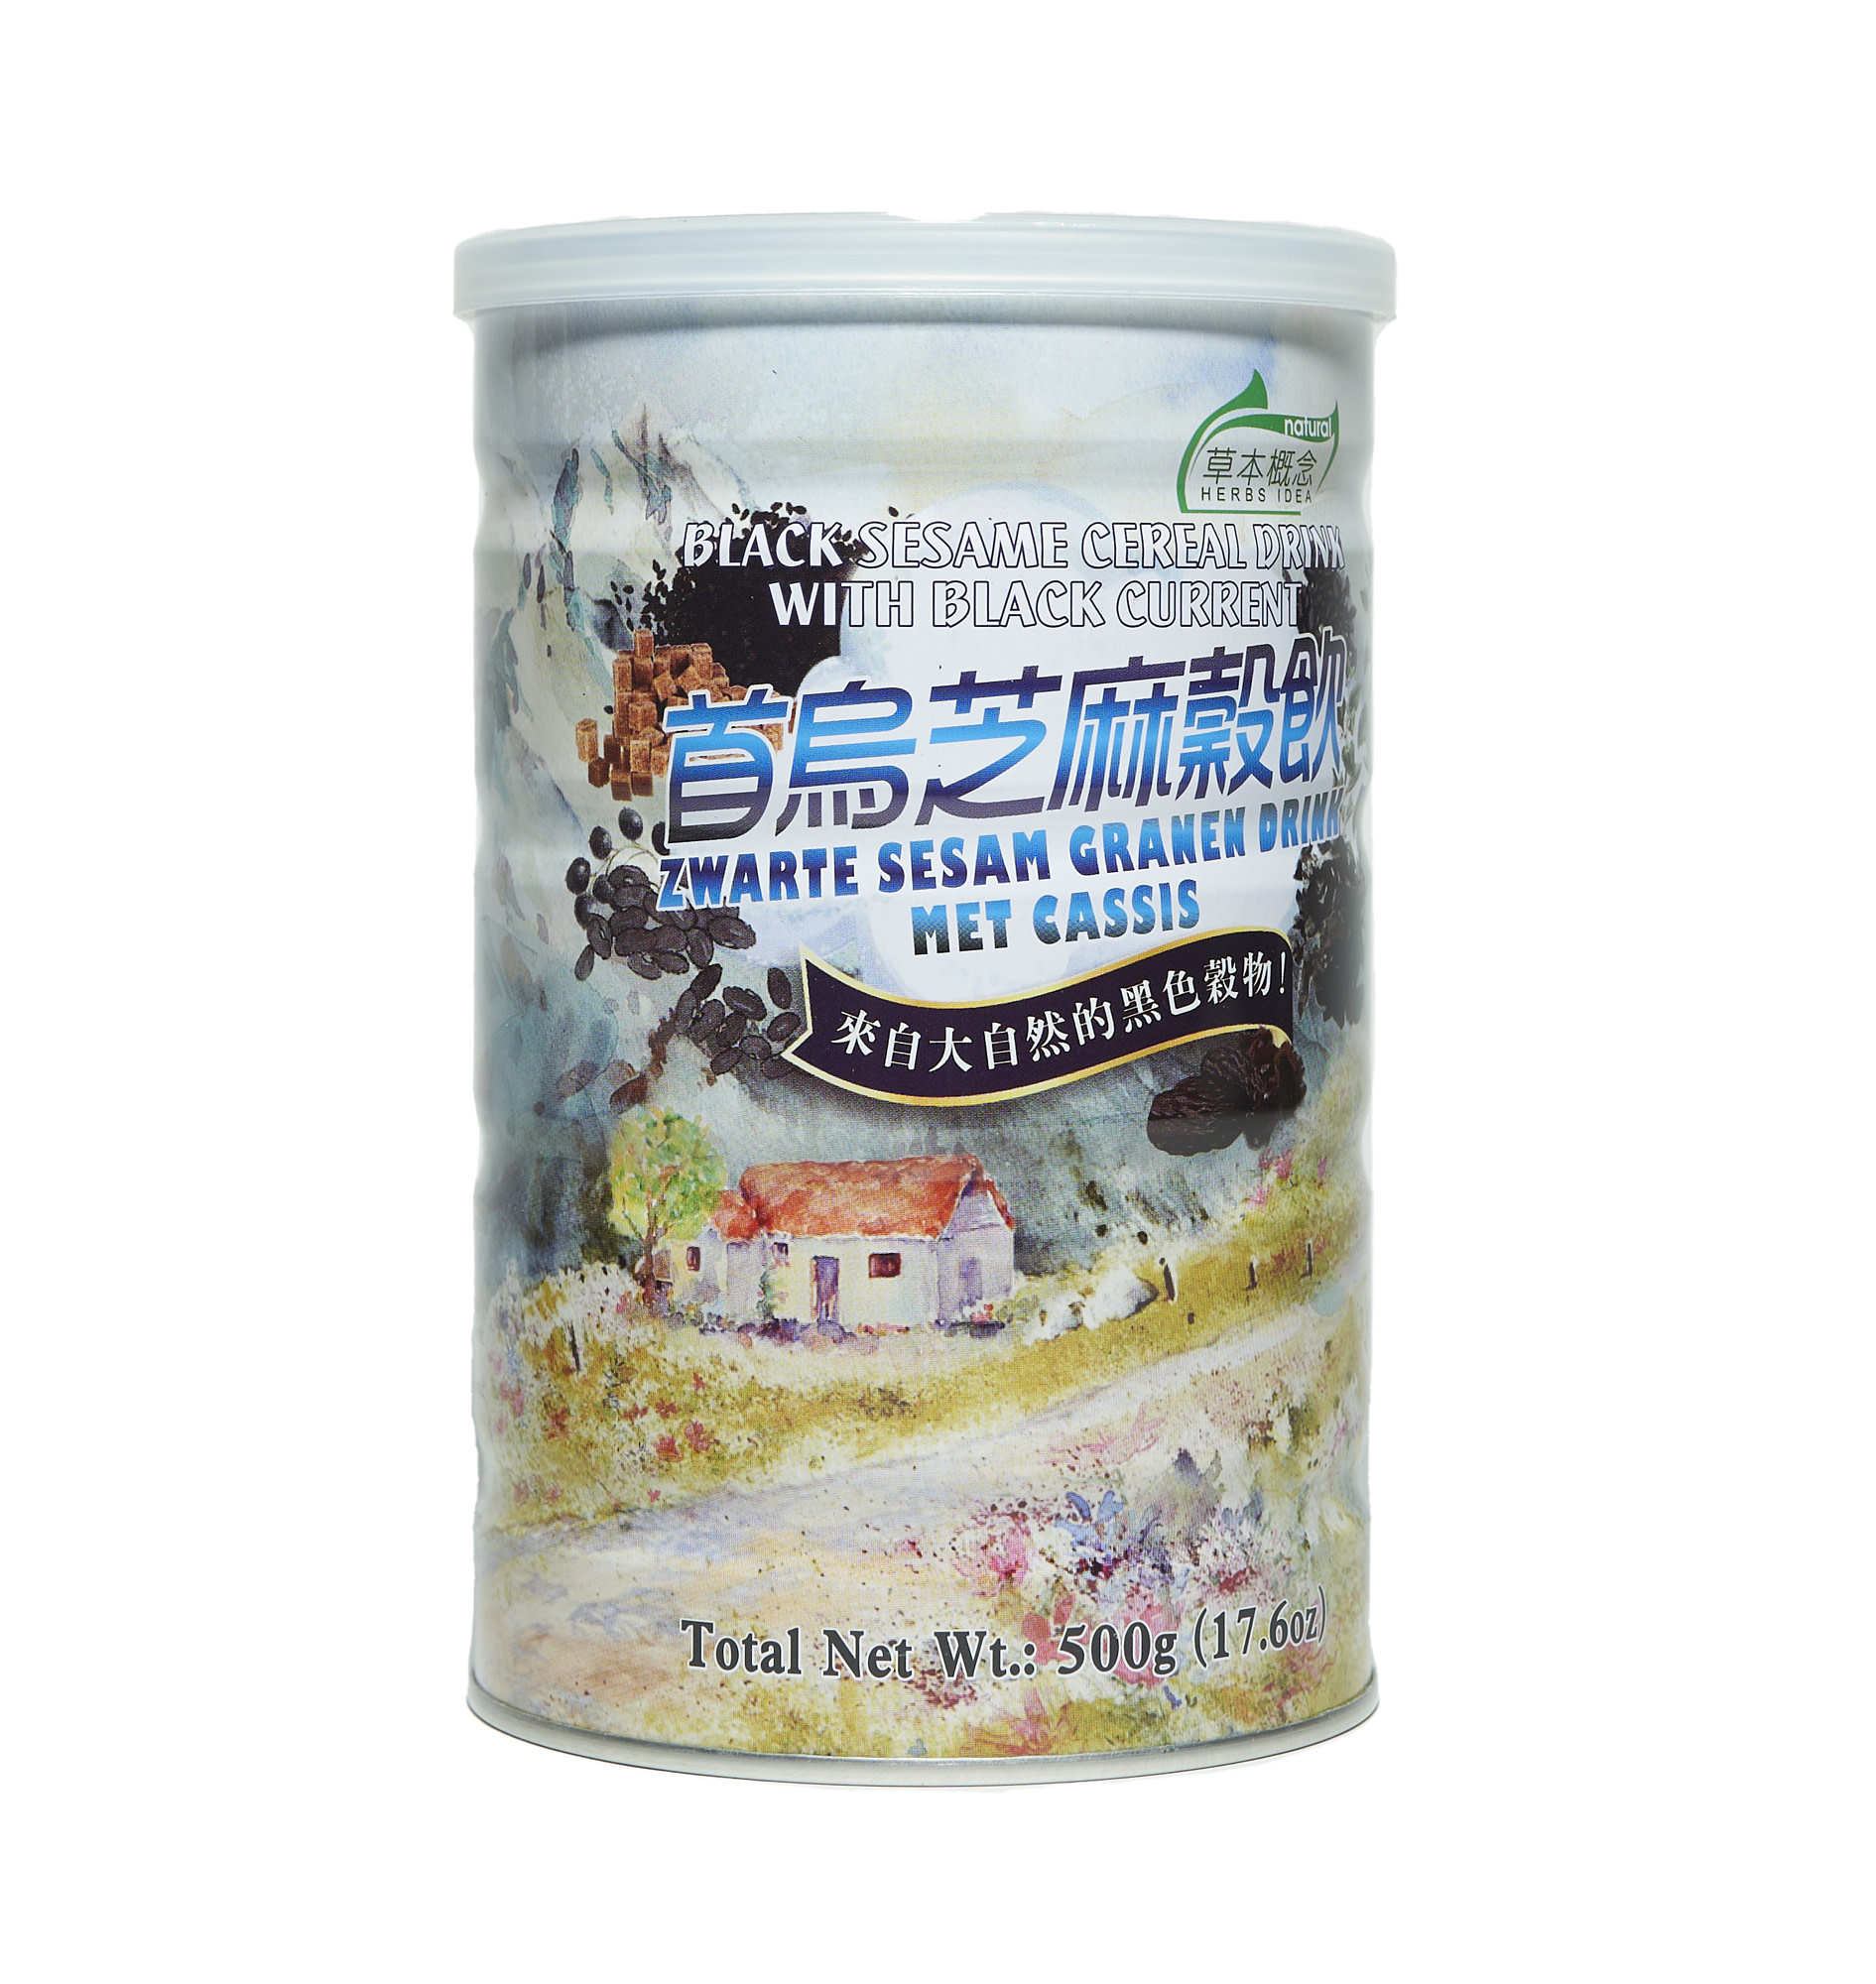 TAIPEI ACUPUNCTURE S&K Black Sesame Cereal Drink with Black Current